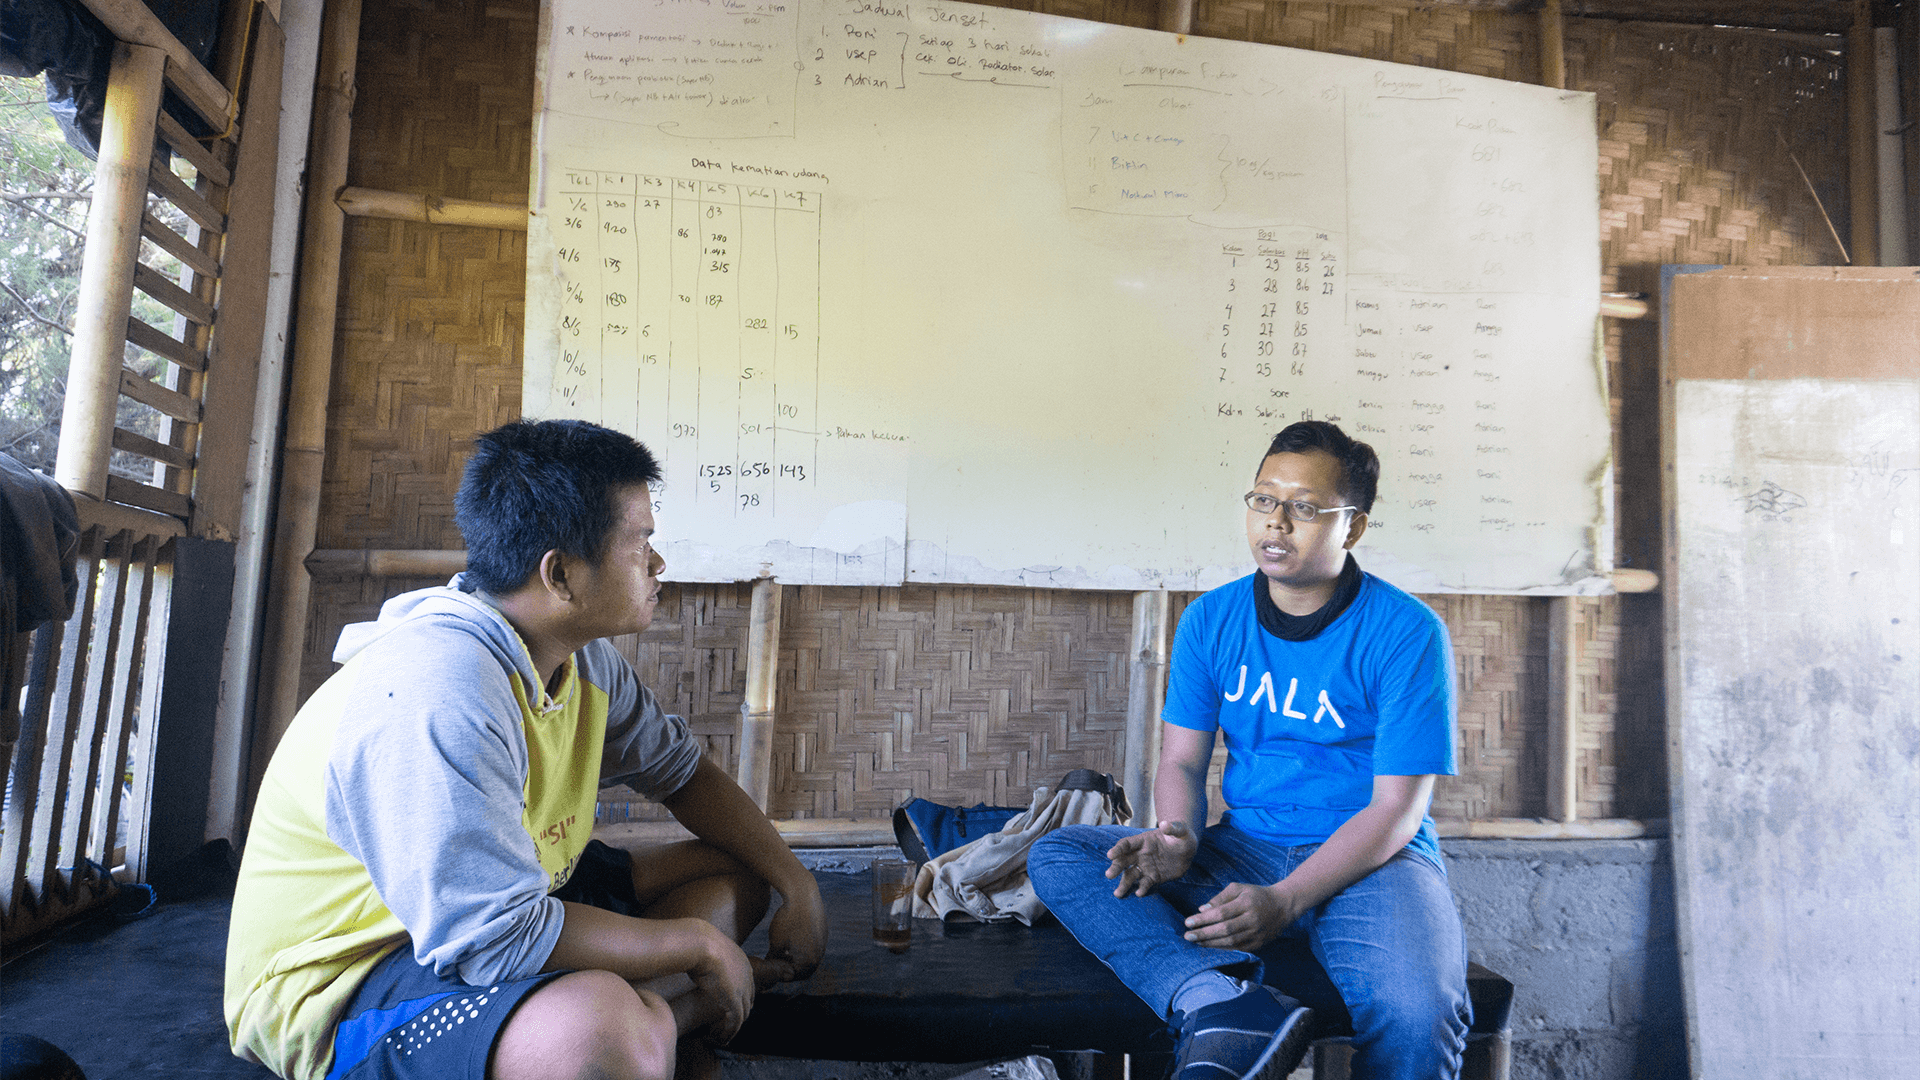 Pak Angga solves the hassle of recording cultivation data of 11 shrimp ponds